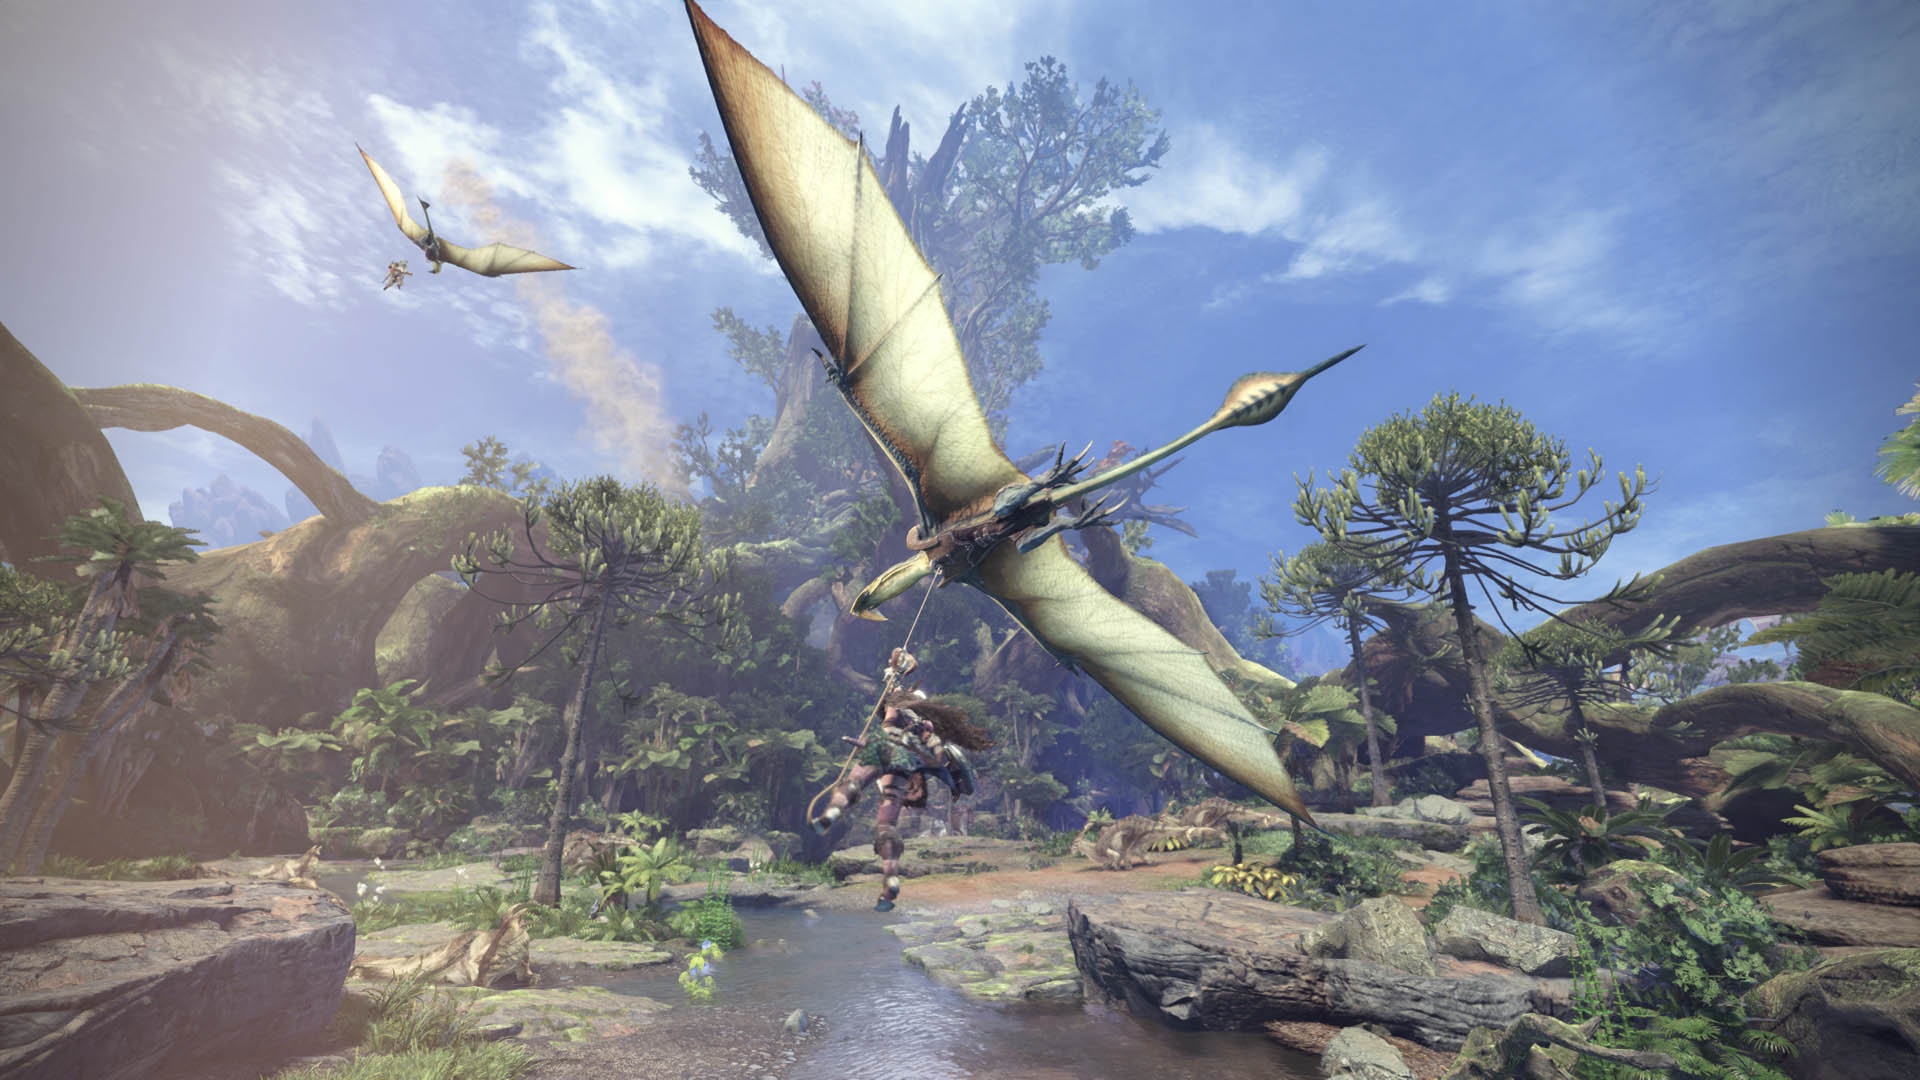 A dinosaur-like creature in one of the best dinosaur games, Monster Hunter: World